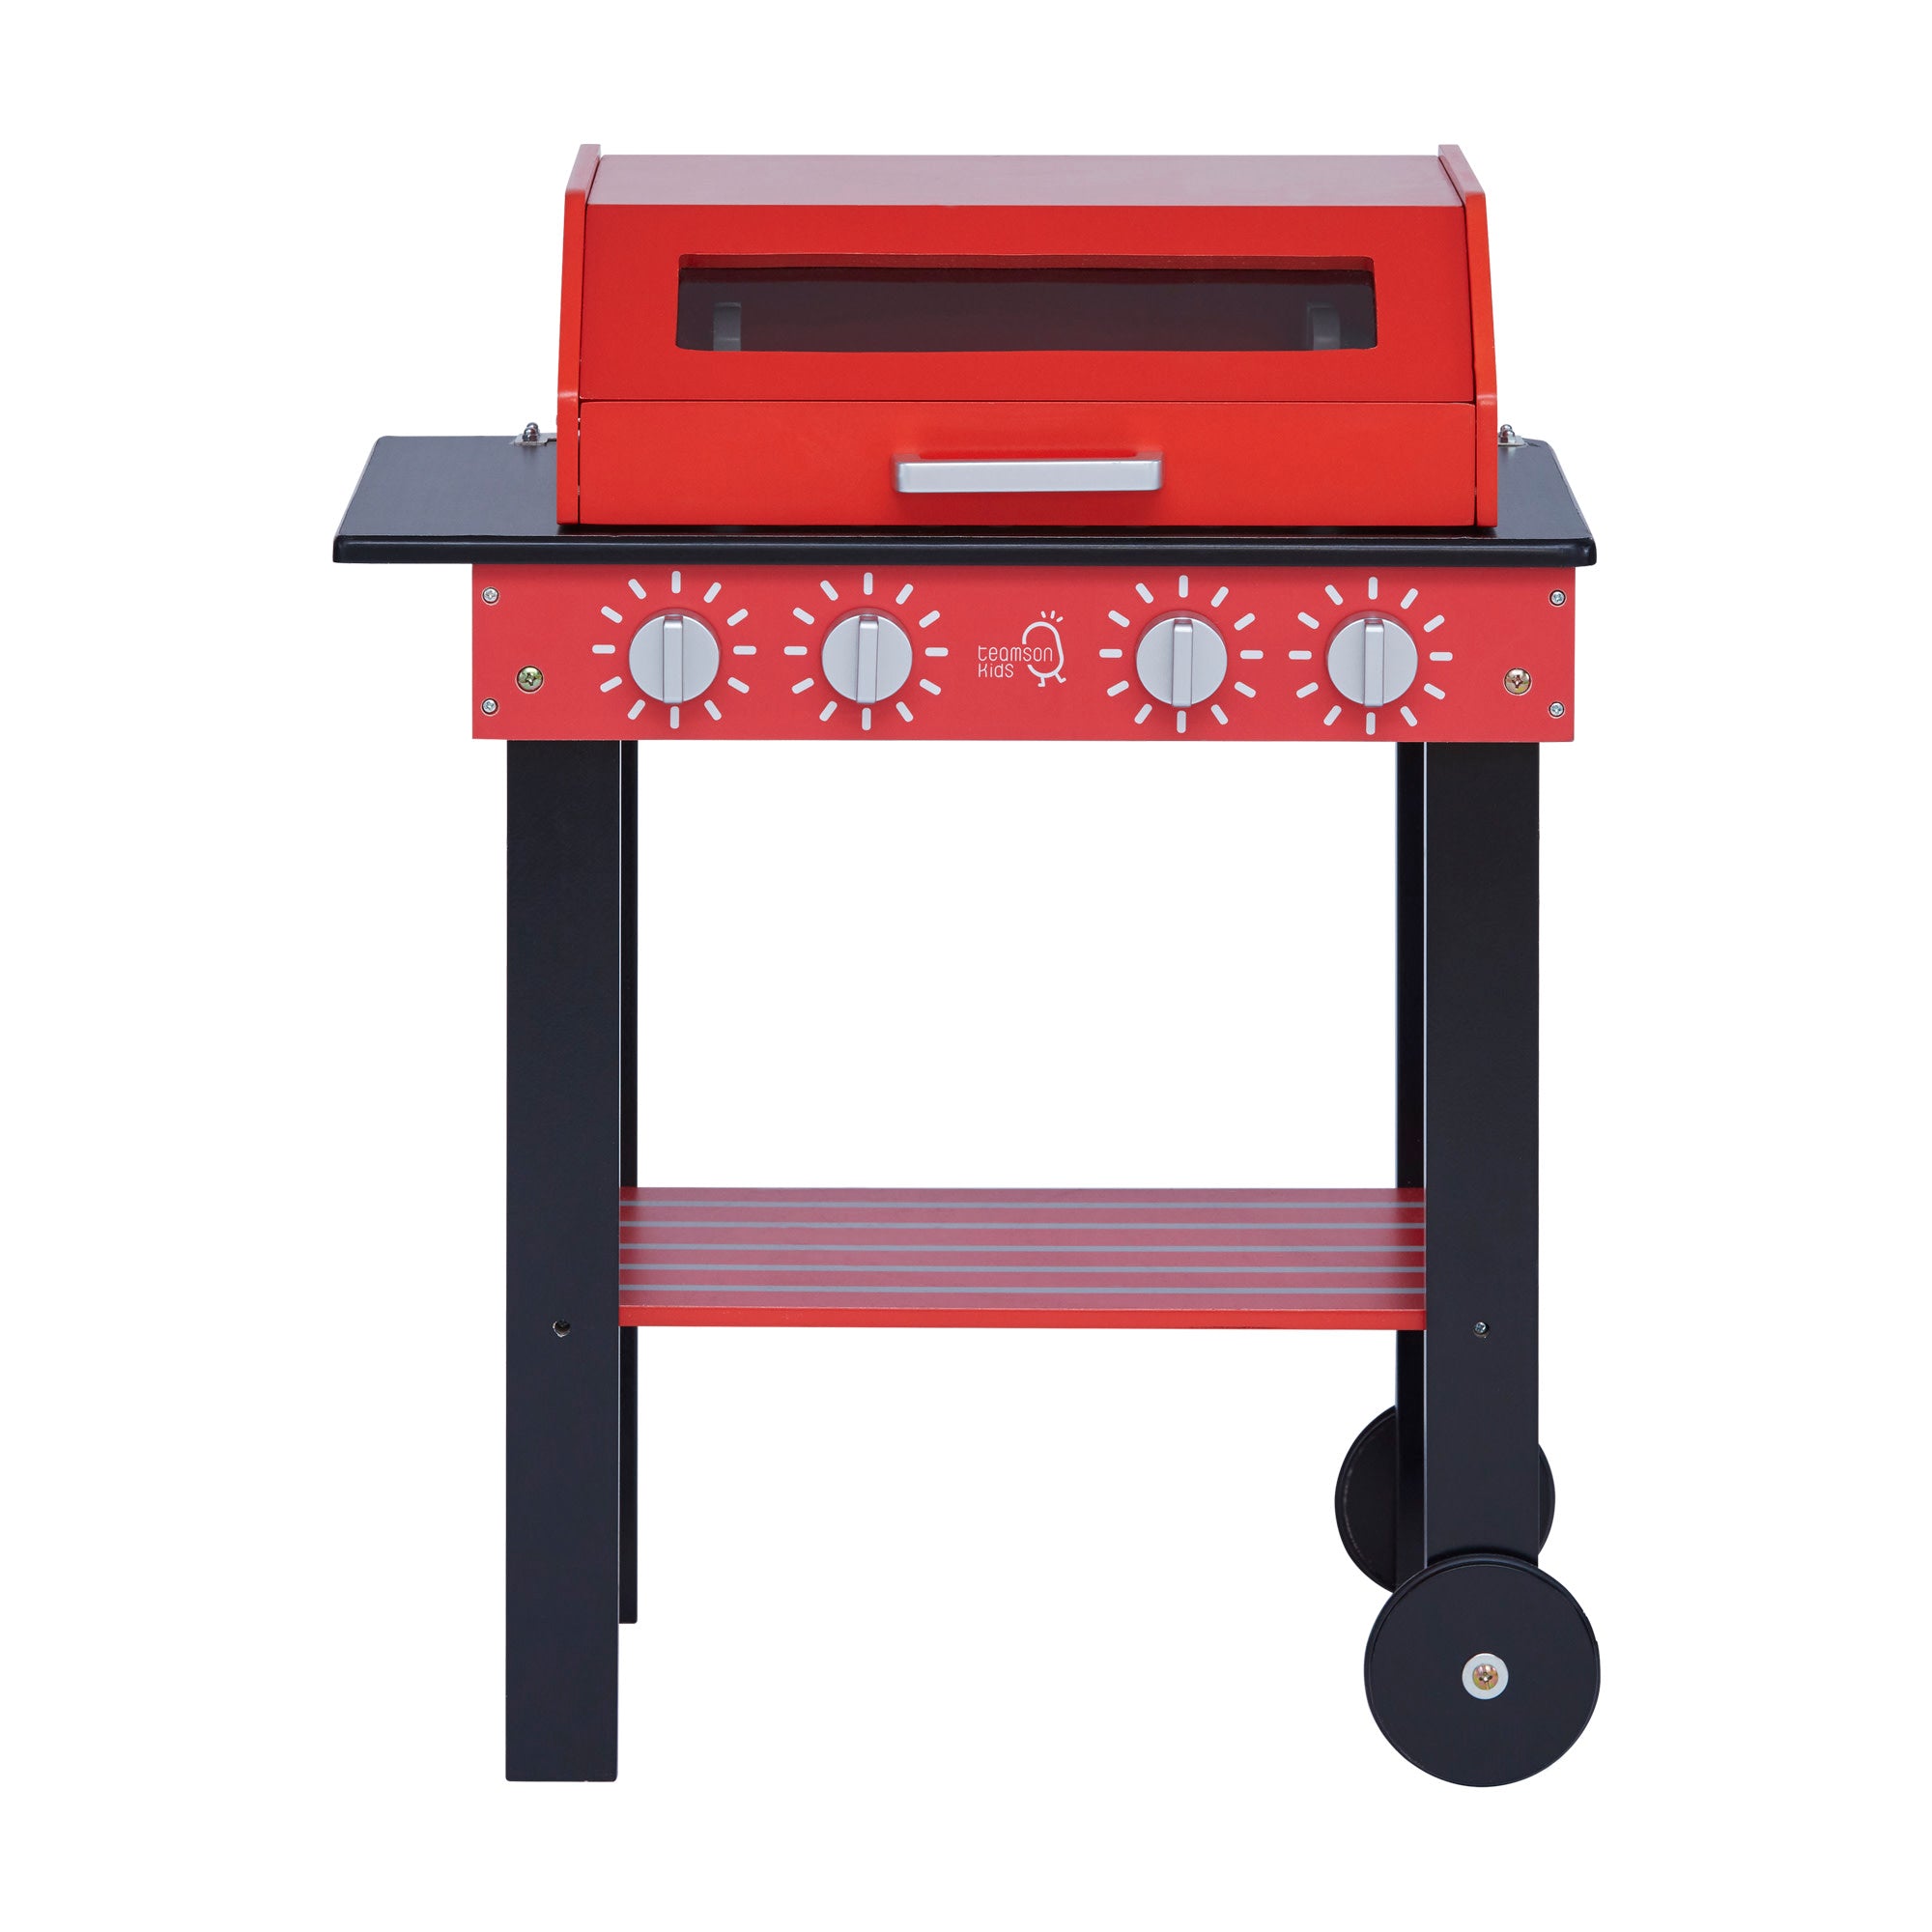 Teamson Kids Little Helper Wooden Backyard BBQ Grill Playset with 26 Cooking Accessories, Red/Black